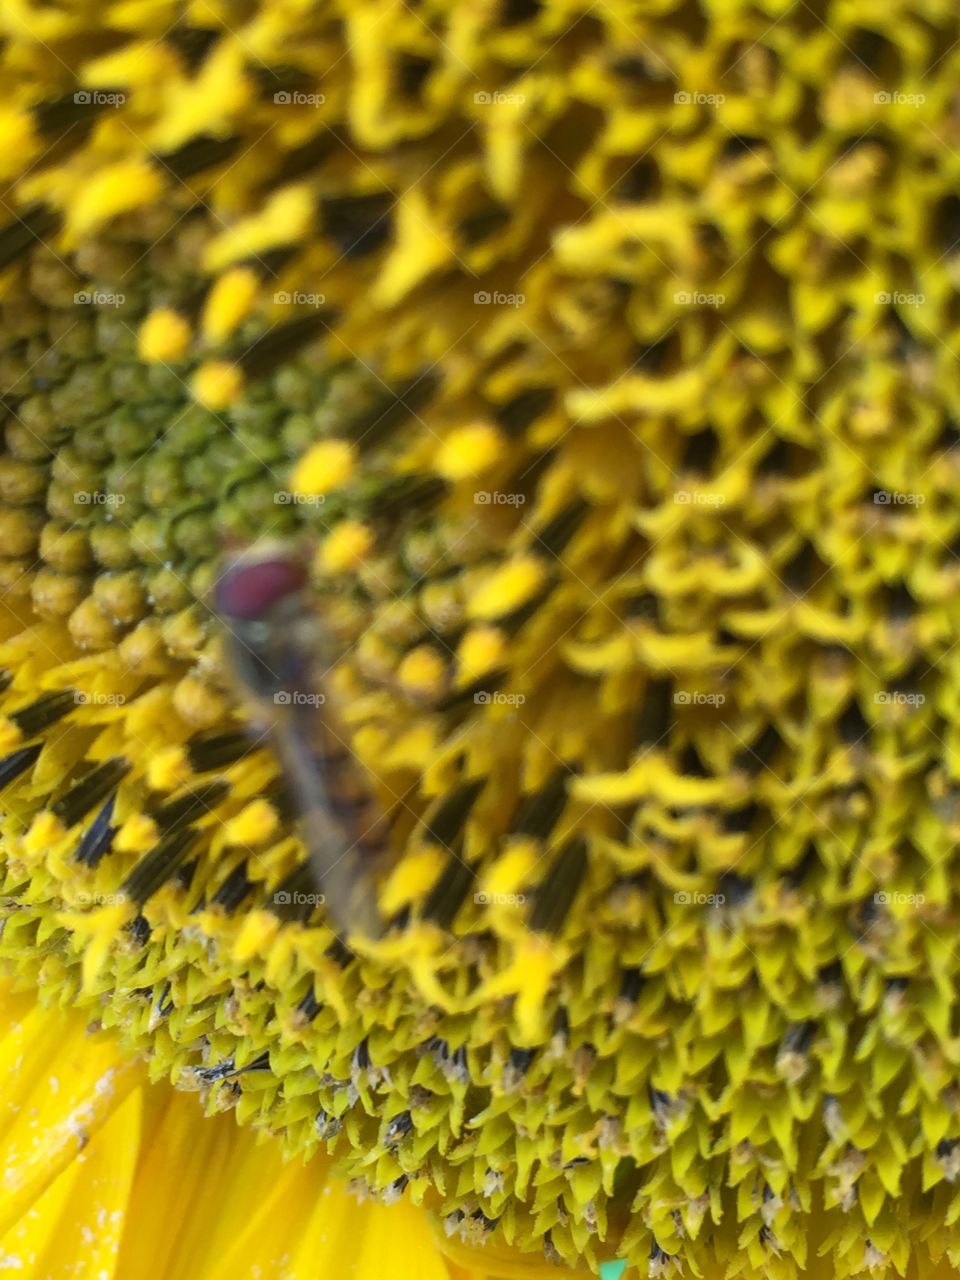 Sunflower Insect 